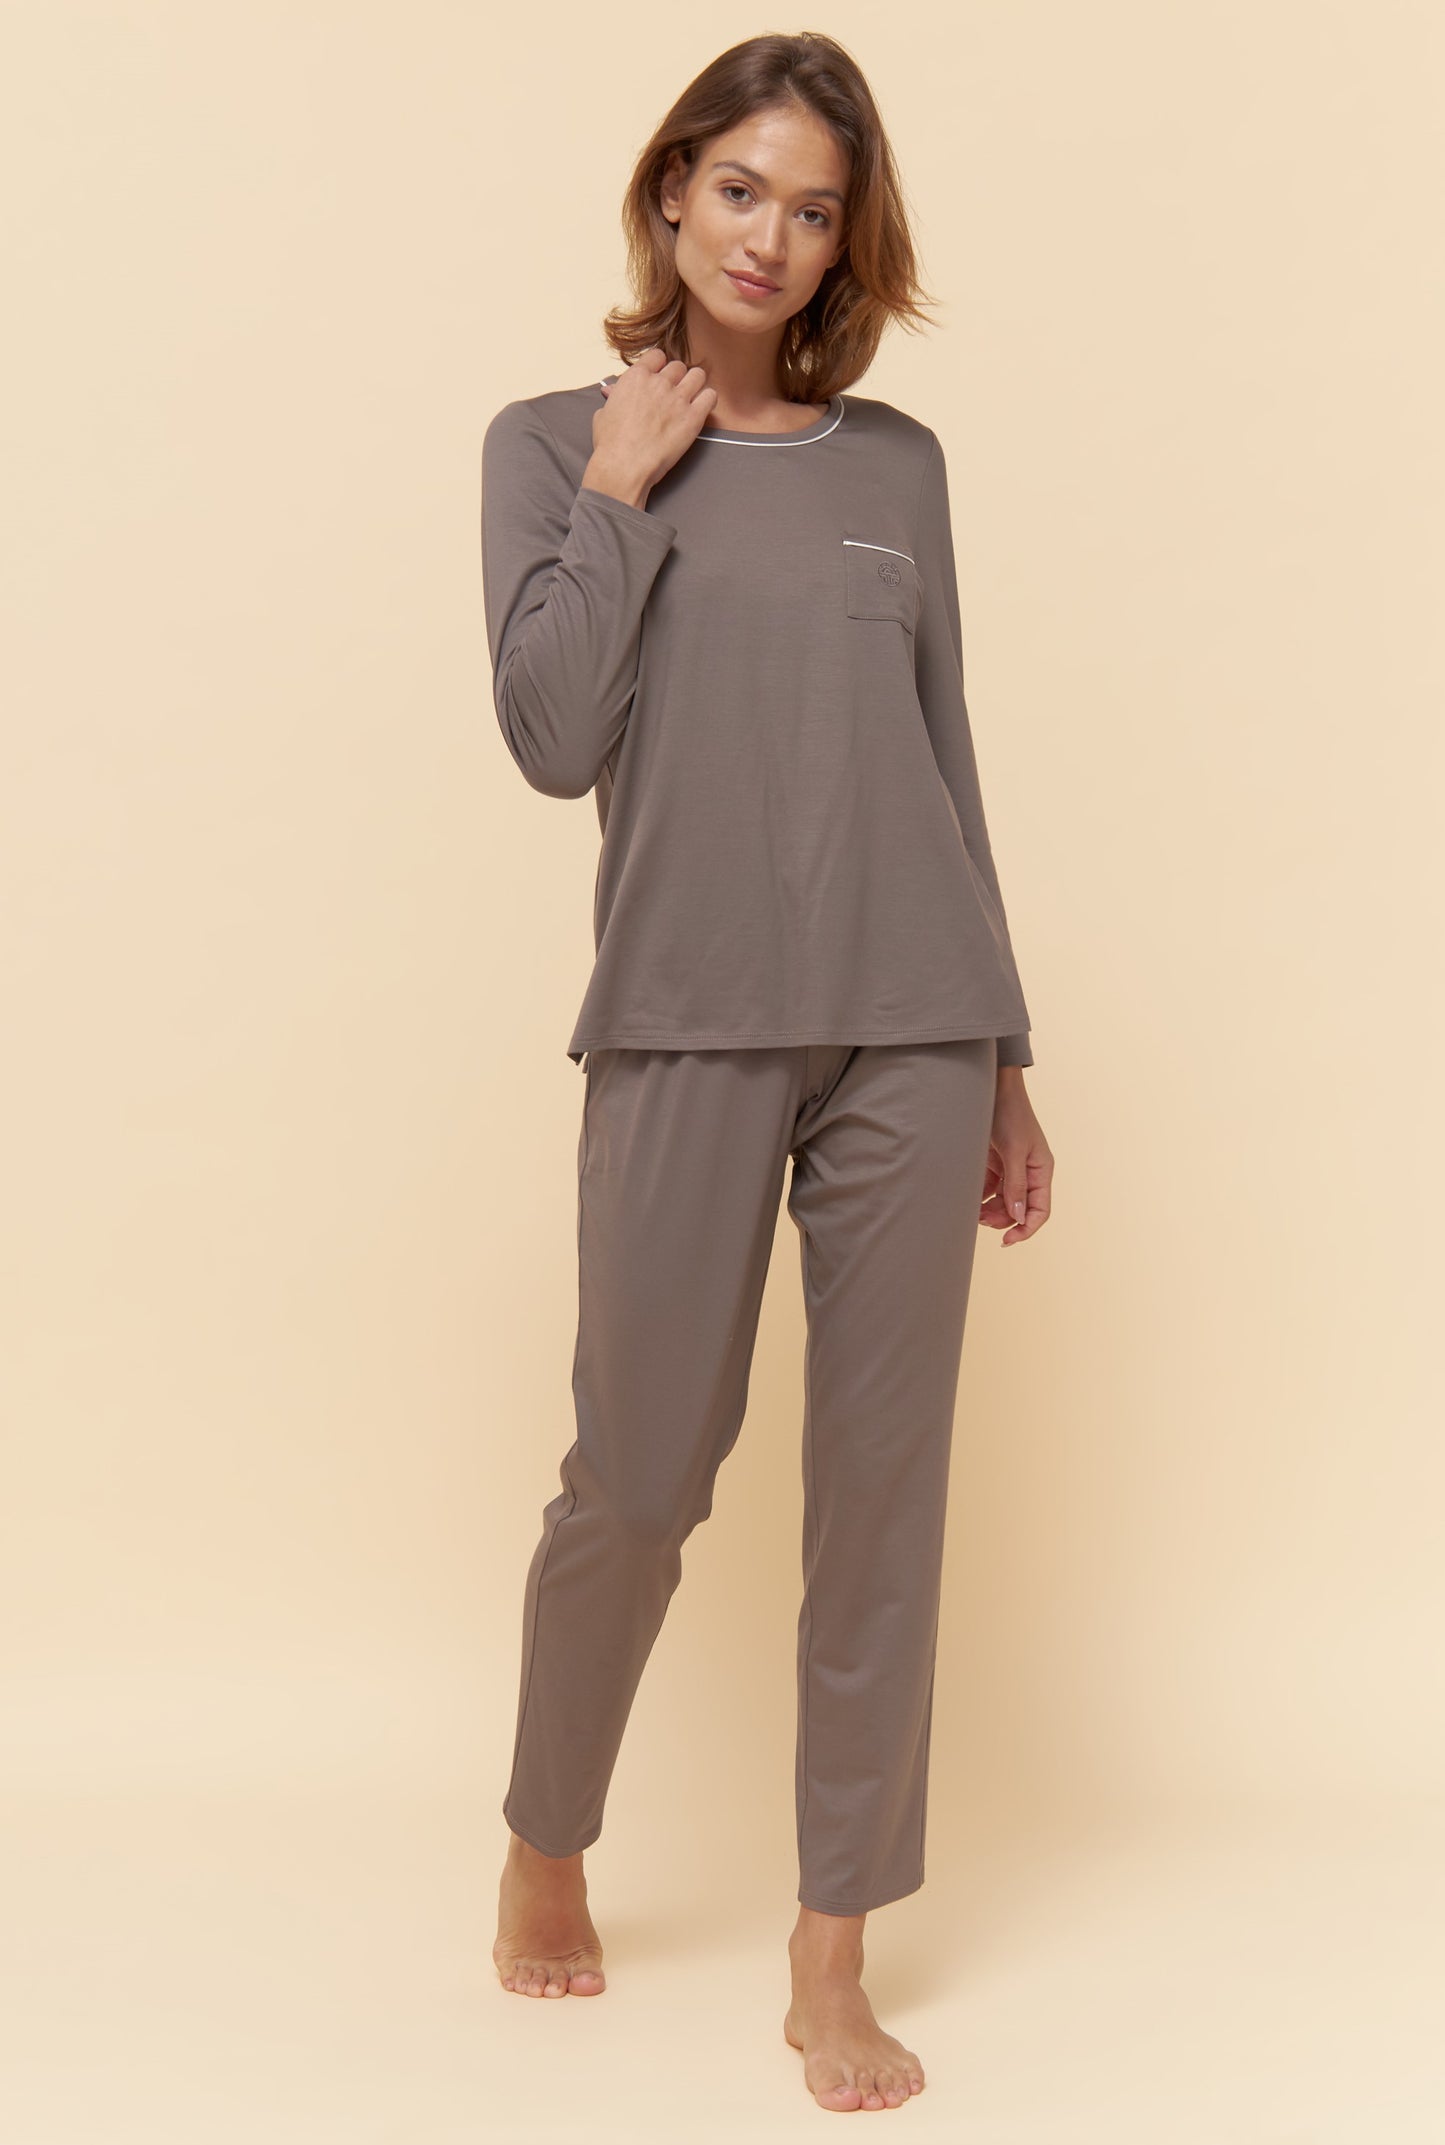 Féraud Paris' opulent High Class line offers this pajama set, constructed from a blend of cotton and modal knits in a luxuriant jersey material, adorned with a brand logo pocket detail. 